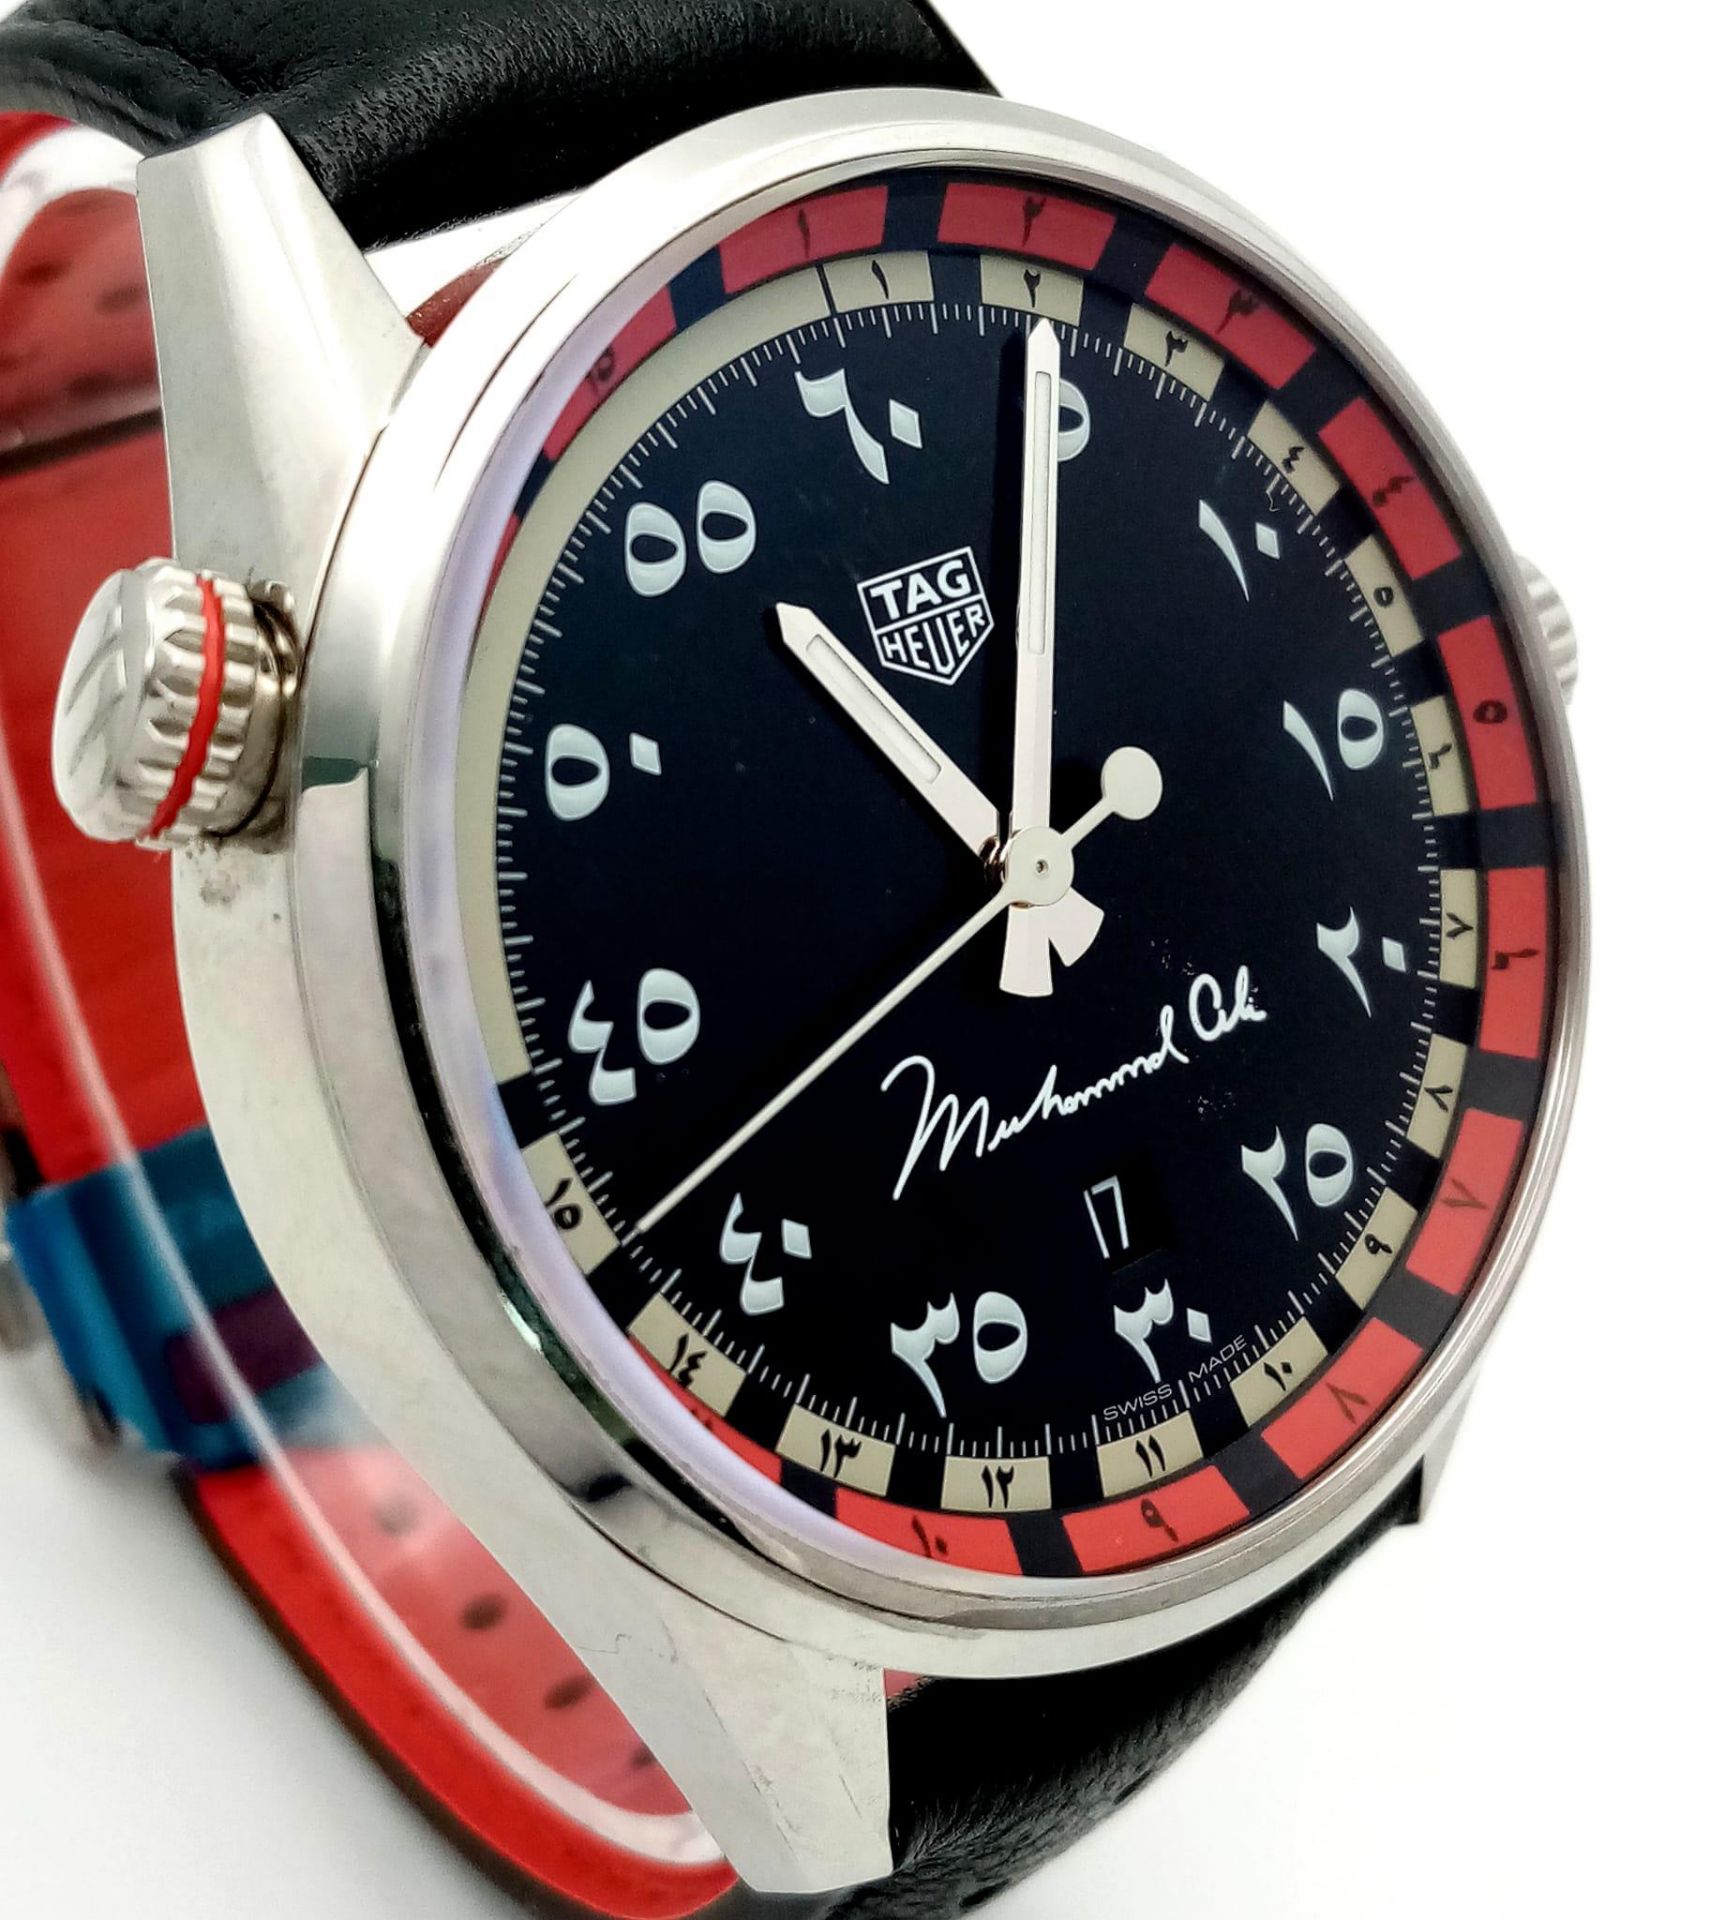 A TAG HEUER CARRERA LIMITED EDITION (MUHAMMED ALI) WATCH WITH ARABIC NUMERALS AND ON THE ORIGINAL - Image 3 of 7